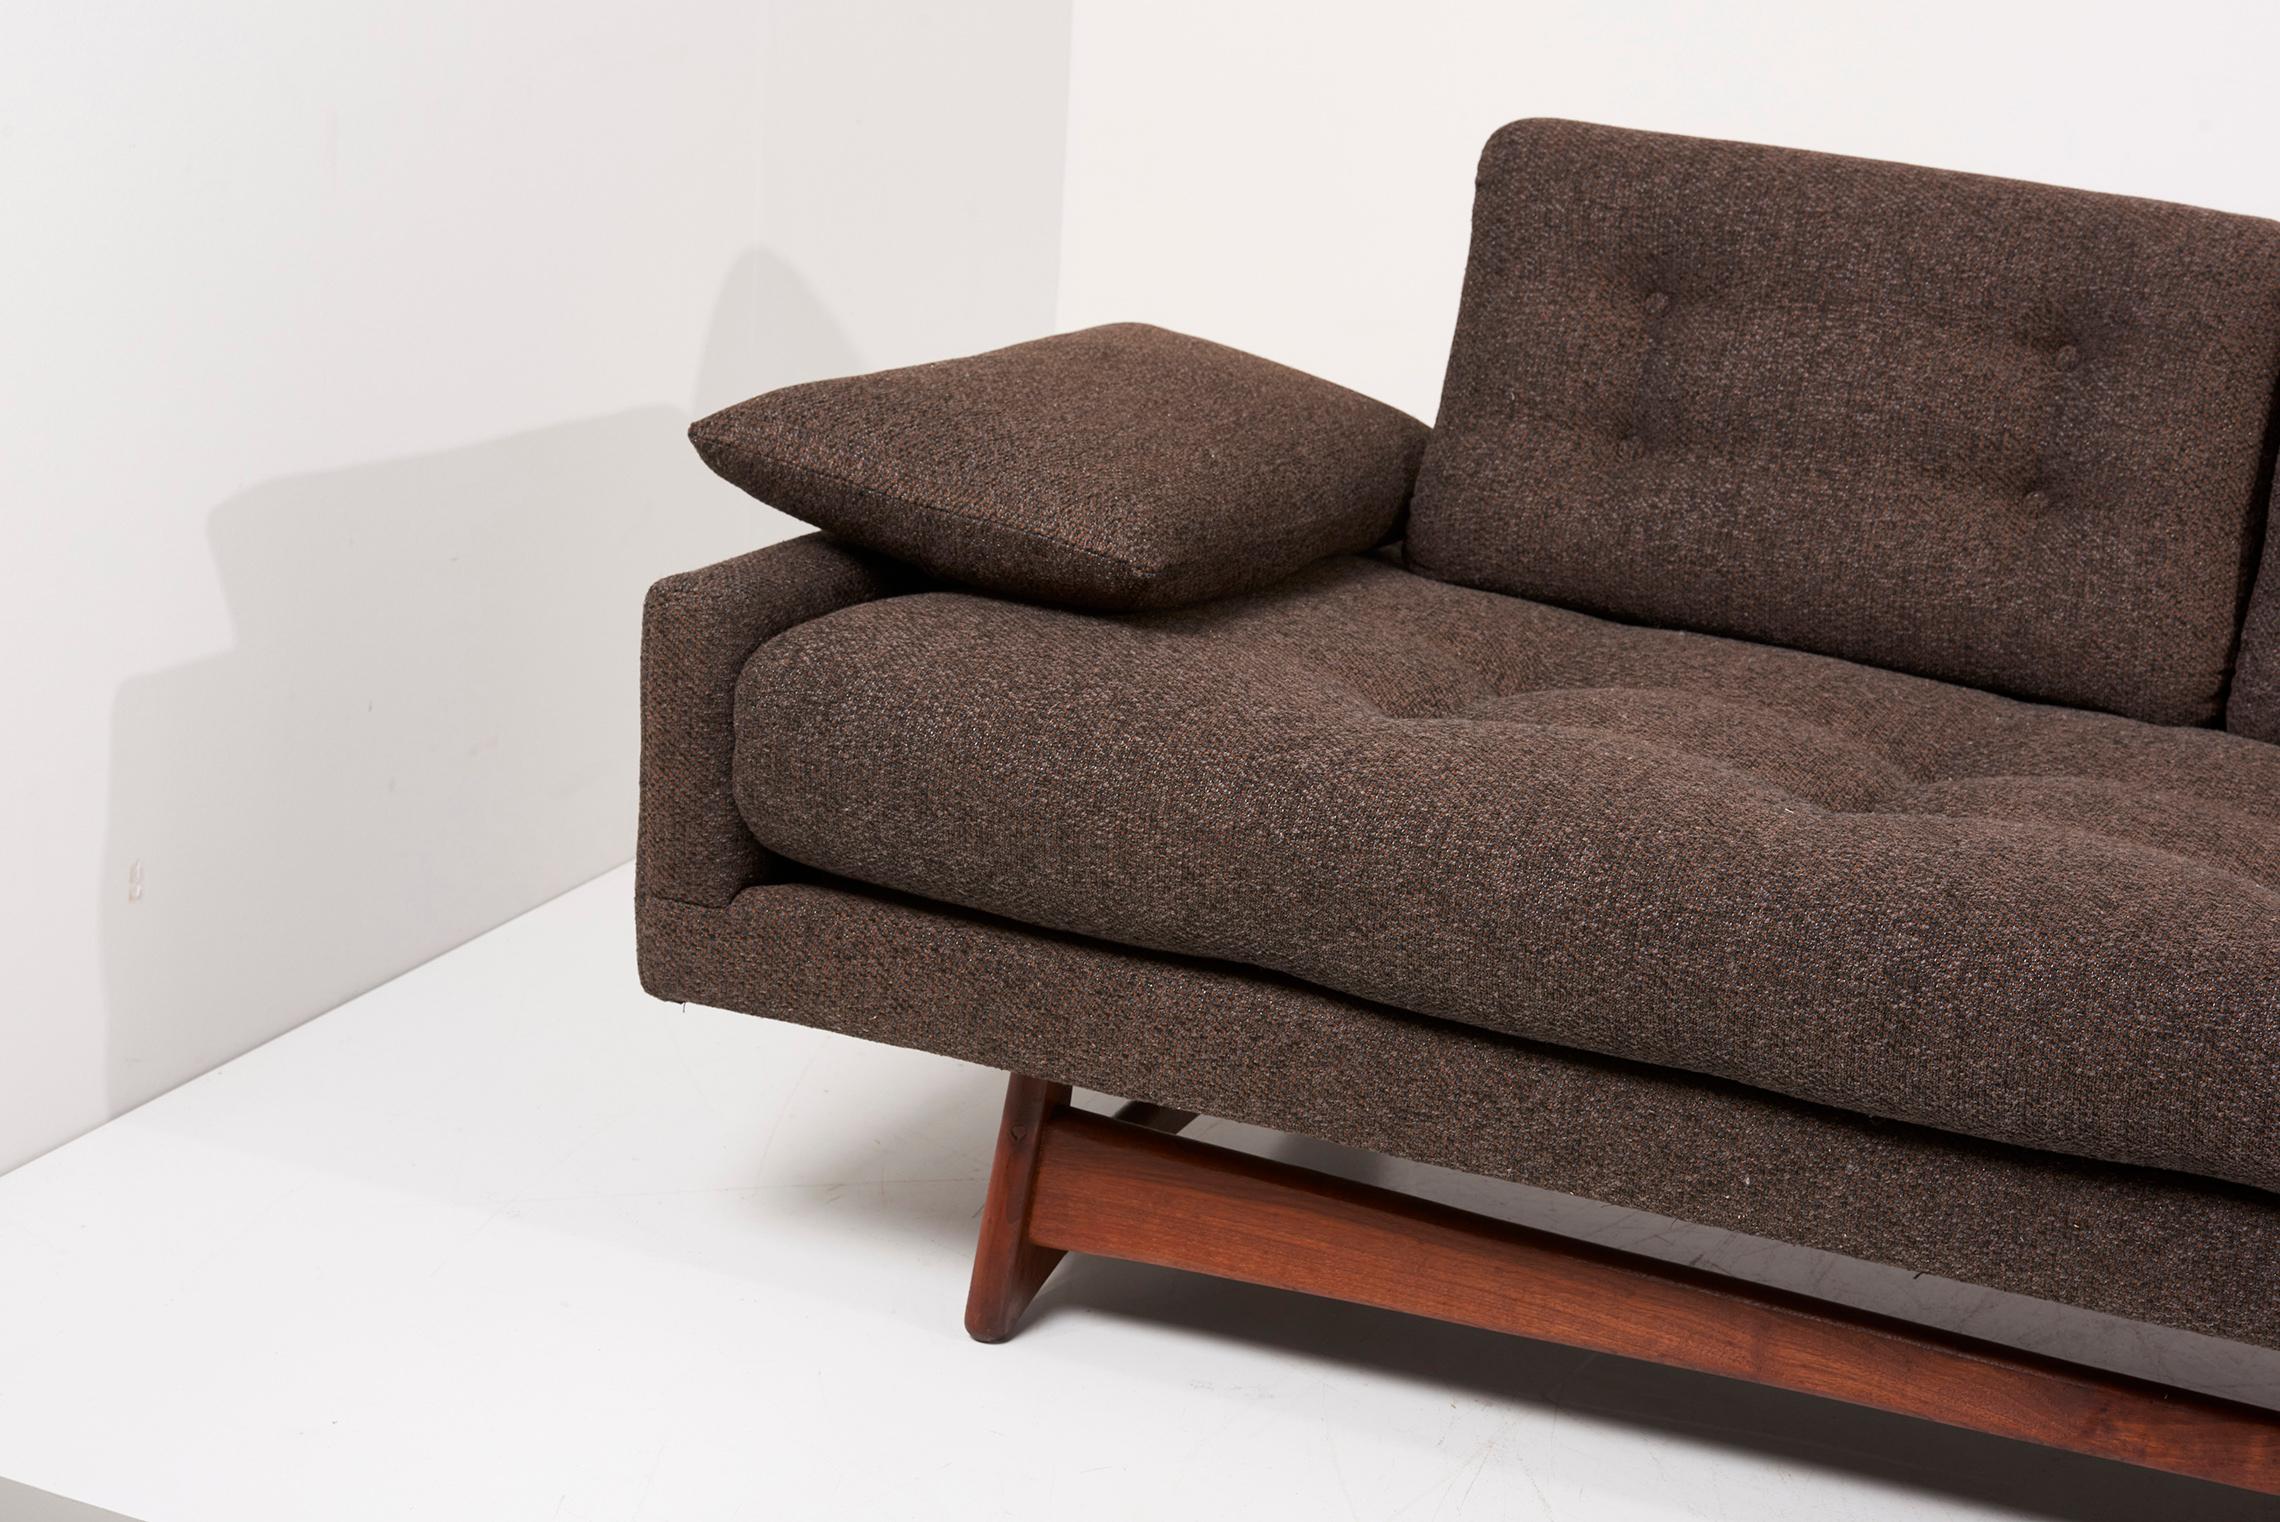 Upholstery Adrian Pearsall 'Gondola Sofa' in Brown Fabric for Craft Associates, USA, 1950s For Sale